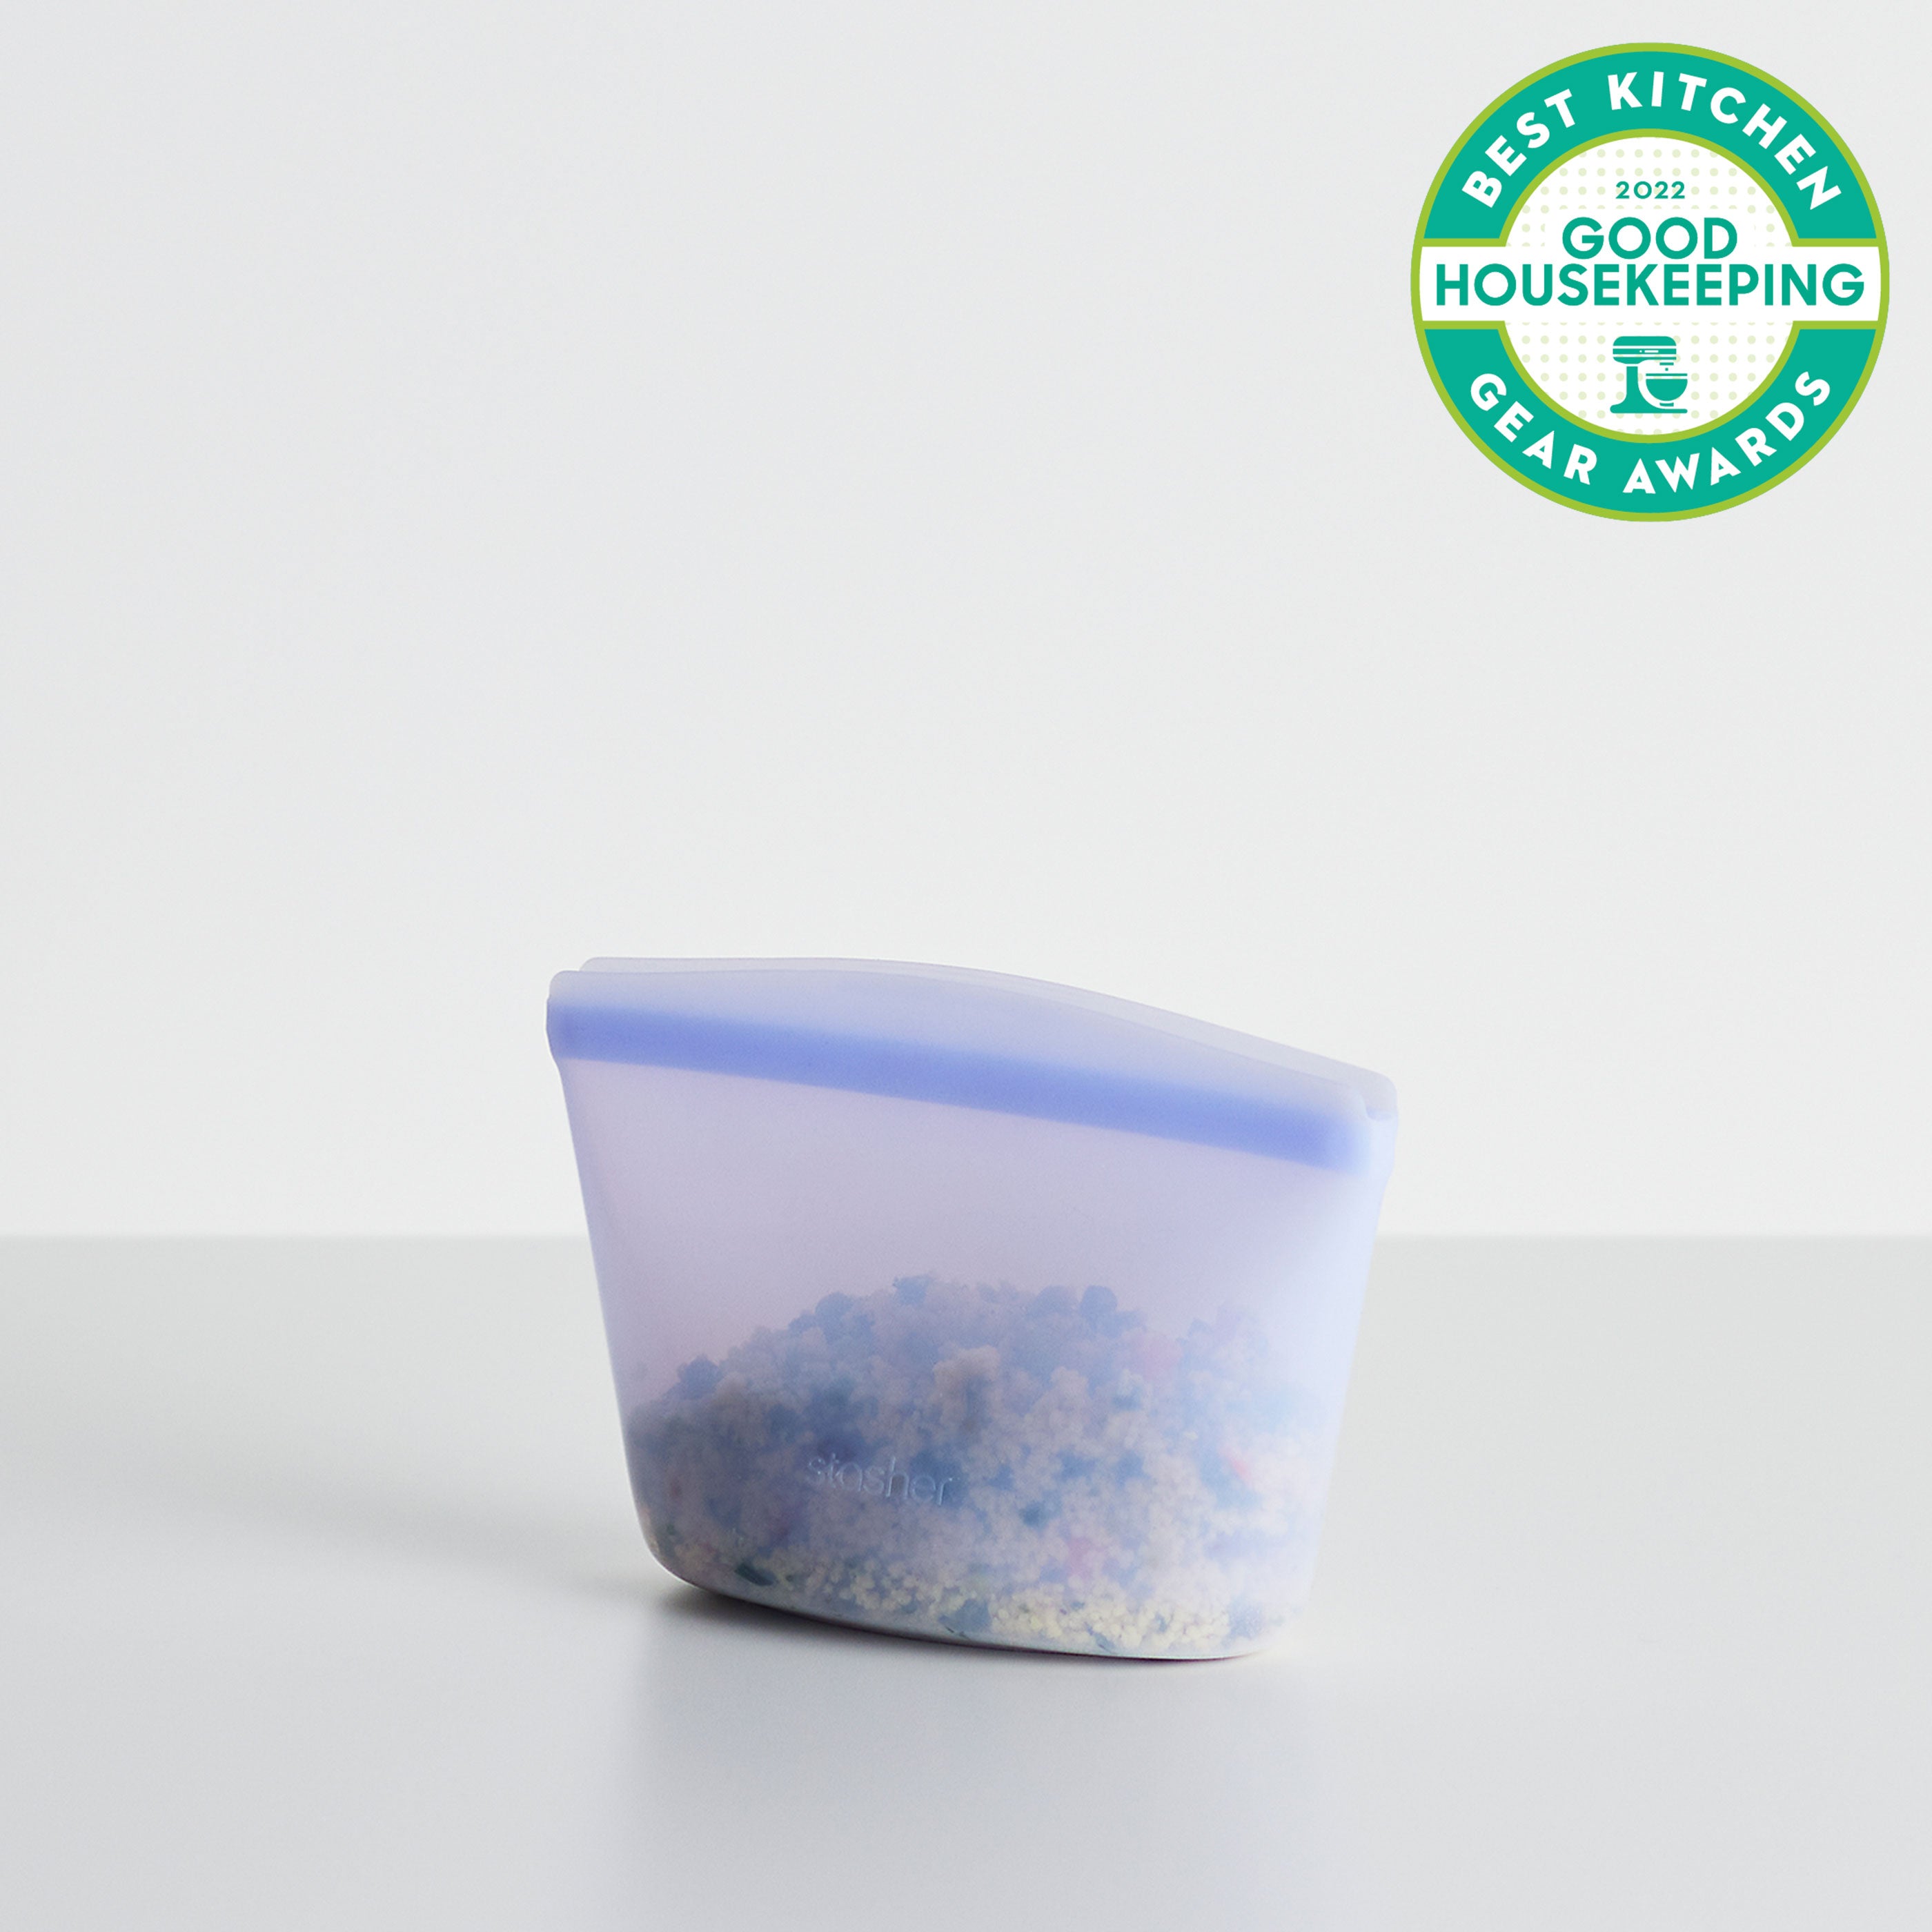 Stasher 2-Cup Bowl in Lavender | Silicone